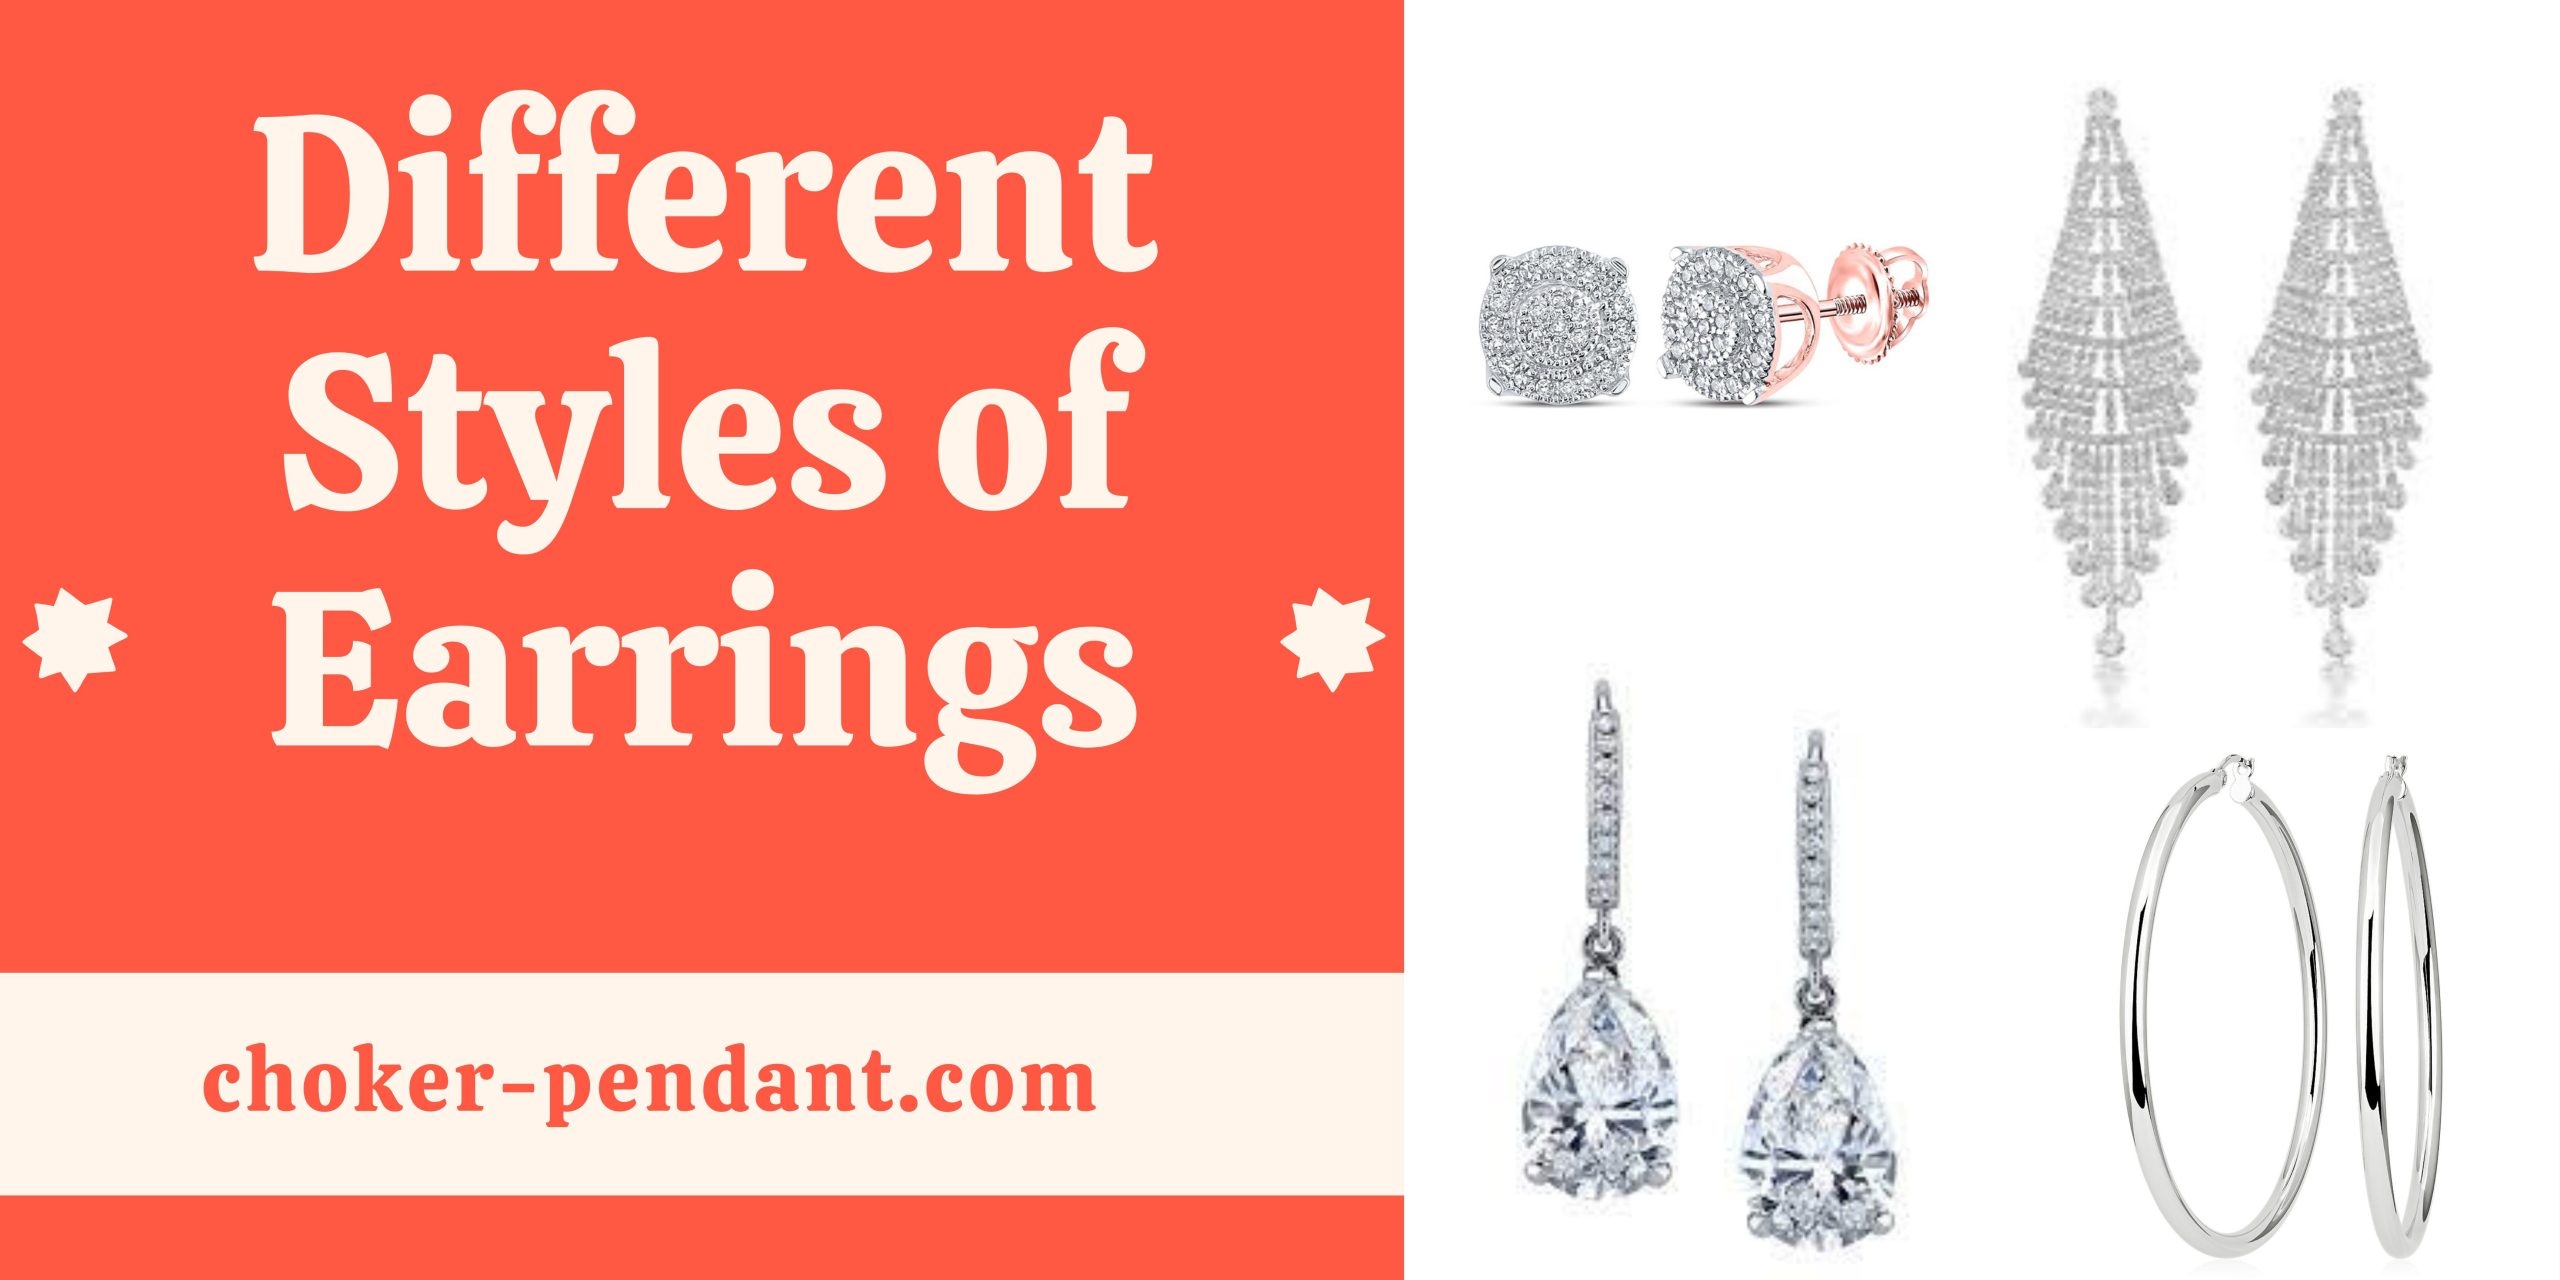 Different Styles of Earrings